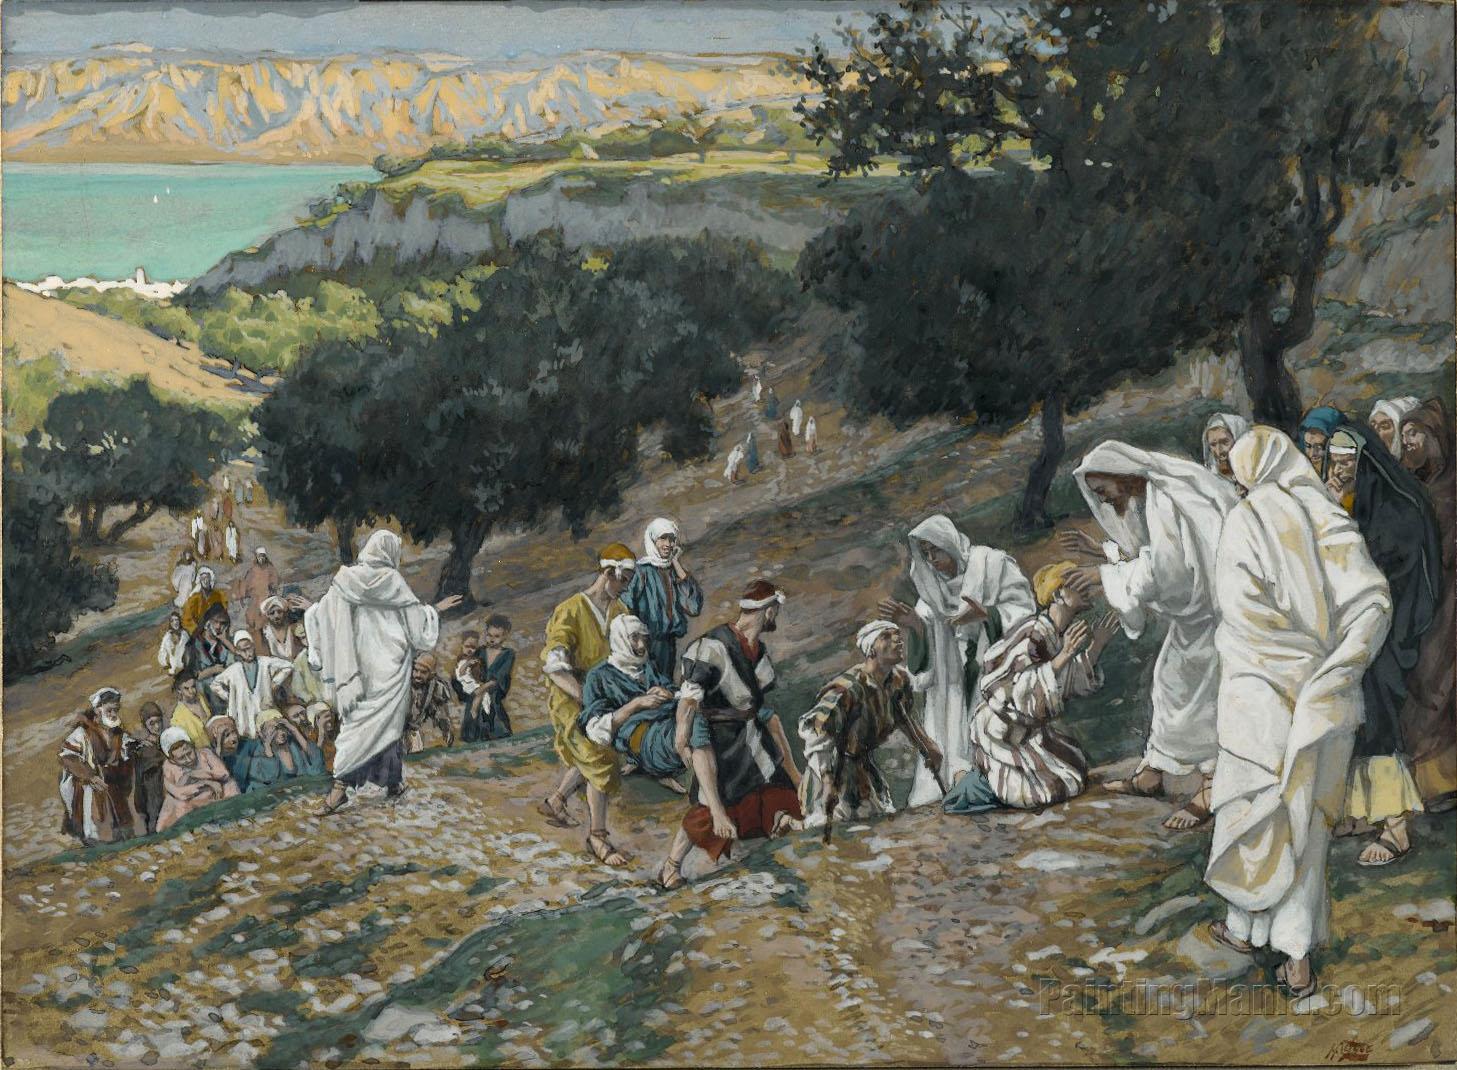 Jesus Heals the Blind and Lame on the Mountain